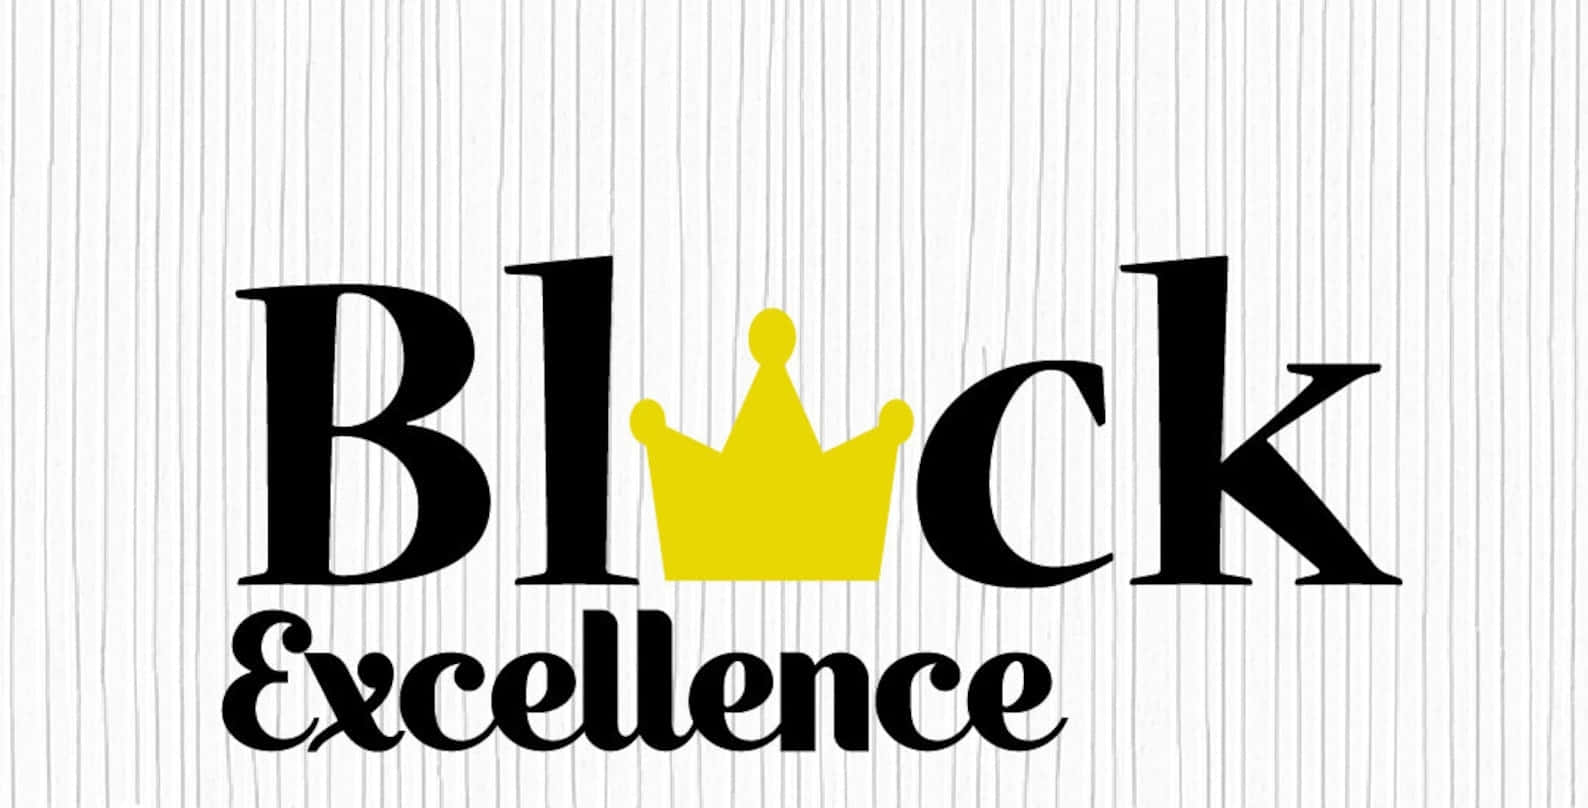 A celebration of Black Excellence Wallpaper